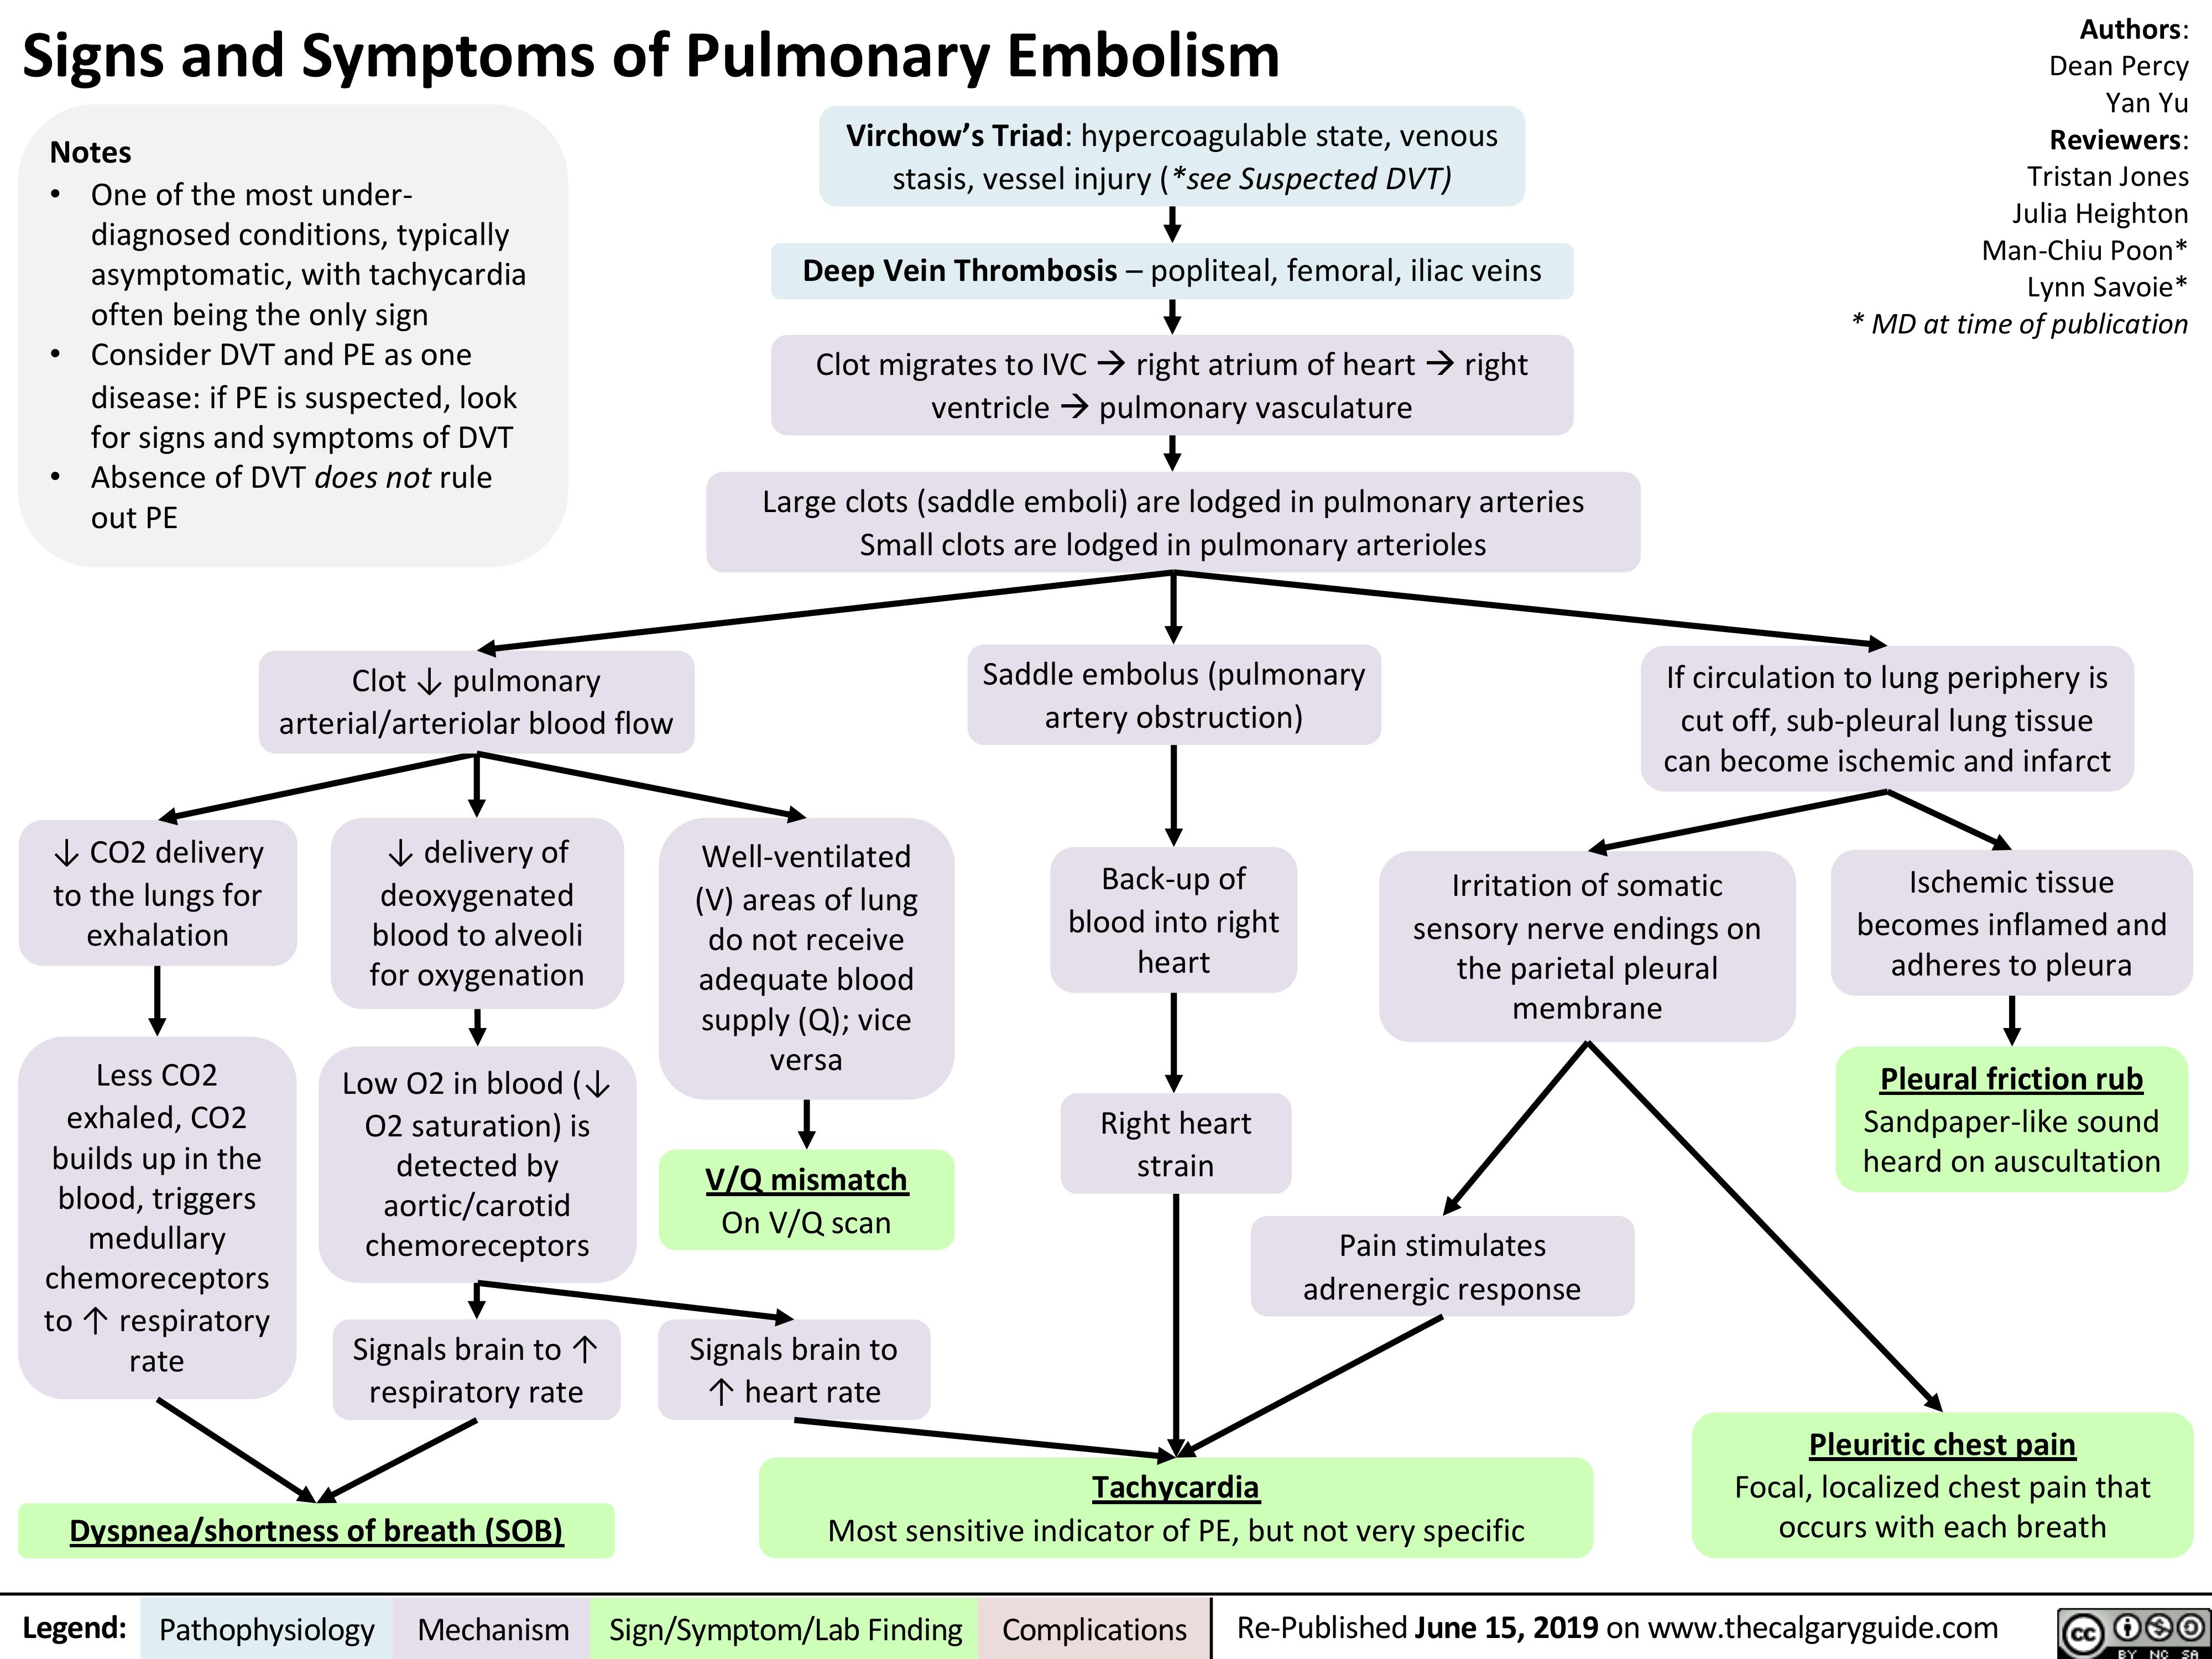 Signs and Symptoms of Pulmonary Embolism
Authors: Dean Percy Yan Yu Reviewers: Tristan Jones Julia Heighton Man-Chiu Poon* Lynn Savoie* * MD at time of publication
  Notes
• One of the most under- diagnosed conditions, typically asymptomatic, with tachycardia often being the only sign
• Consider DVT and PE as one disease: if PE is suspected, look for signs and symptoms of DVT
• Absence of DVT does not rule out PE
Virchow’s Triad: hypercoagulable state, venous stasis, vessel injury (*see Suspected DVT)
Deep Vein Thrombosis – popliteal, femoral, iliac veins Clot migrates to IVCàright atrium of heartàright
ventricleàpulmonary vasculature
Large clots (saddle emboli) are lodged in pulmonary arteries
Small clots are lodged in pulmonary arterioles
Saddle embolus (pulmonary artery obstruction)
Back-up of blood into right heart
Right heart strain
          ↓ CO2 delivery to the lungs for exhalation
Less CO2 exhaled, CO2 builds up in the blood, triggers medullary chemoreceptors to ↑ respiratory rate
Well-ventilated (V) areas of lung do not receive adequate blood supply (Q); vice versa
V/Q mismatch
On V/Q scan
Signals brain to ↑ heart rate
Ischemic tissue becomes inflamed and adheres to pleura
Pleural friction rub
Sandpaper-like sound heard on auscultation
Pleuritic chest pain
Focal, localized chest pain that occurs with each breath
Clot ↓ pulmonary arterial/arteriolar blood flow
↓ delivery of deoxygenated blood to alveoli for oxygenation
Low O2 in blood (↓ O2 saturation) is detected by aortic/carotid chemoreceptors
Signals brain to ↑ respiratory rate
If circulation to lung periphery is cut off, sub-pleural lung tissue can become ischemic and infarct
        Irritation of somatic sensory nerve endings on the parietal pleural membrane
              Pain stimulates adrenergic response
           Tachycardia
  Dyspnea/shortness of breath (SOB)
Most sensitive indicator of PE, but not very specific
  Legend:
 Pathophysiology
 Mechanism
Sign/Symptom/Lab Finding
  Complications
Re-Published June 15, 2019 on www.thecalgaryguide.com
   